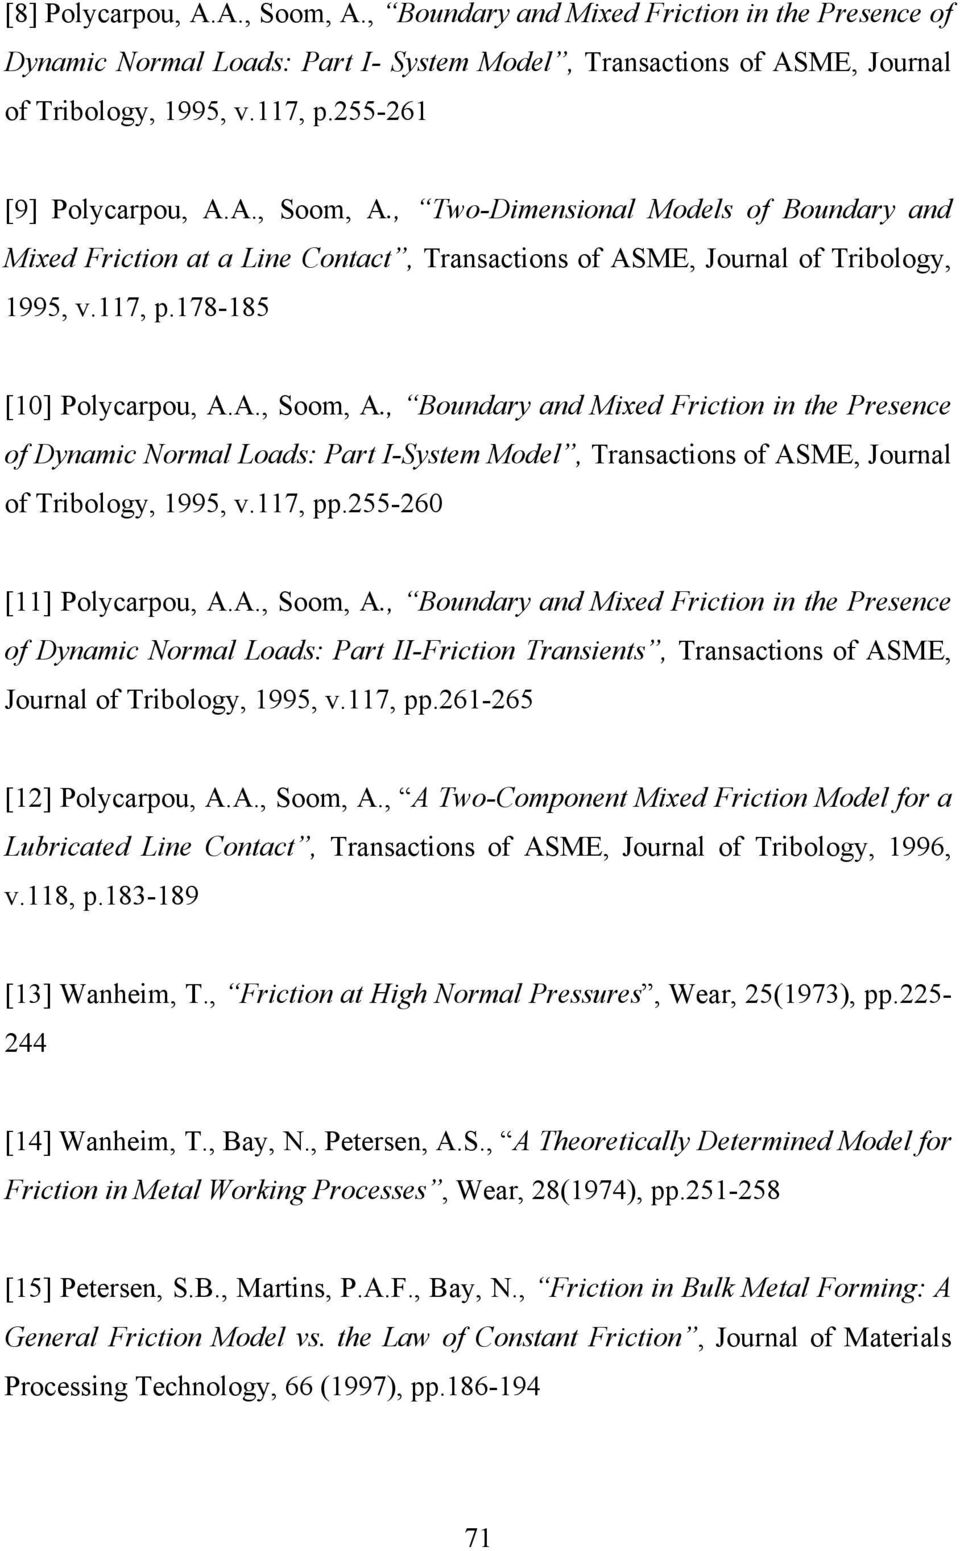 A., Soom, A., Boundary and Mixed Friction in the Presence of Dynamic Normal Loads: Part I-System Model, Transactions of ASME, Journal of Tribology, 1995, v.117, pp.255-260 [11] Polycarpou, A.A., Soom, A., Boundary and Mixed Friction in the Presence of Dynamic Normal Loads: Part II-Friction Transients, Transactions of ASME, Journal of Tribology, 1995, v.